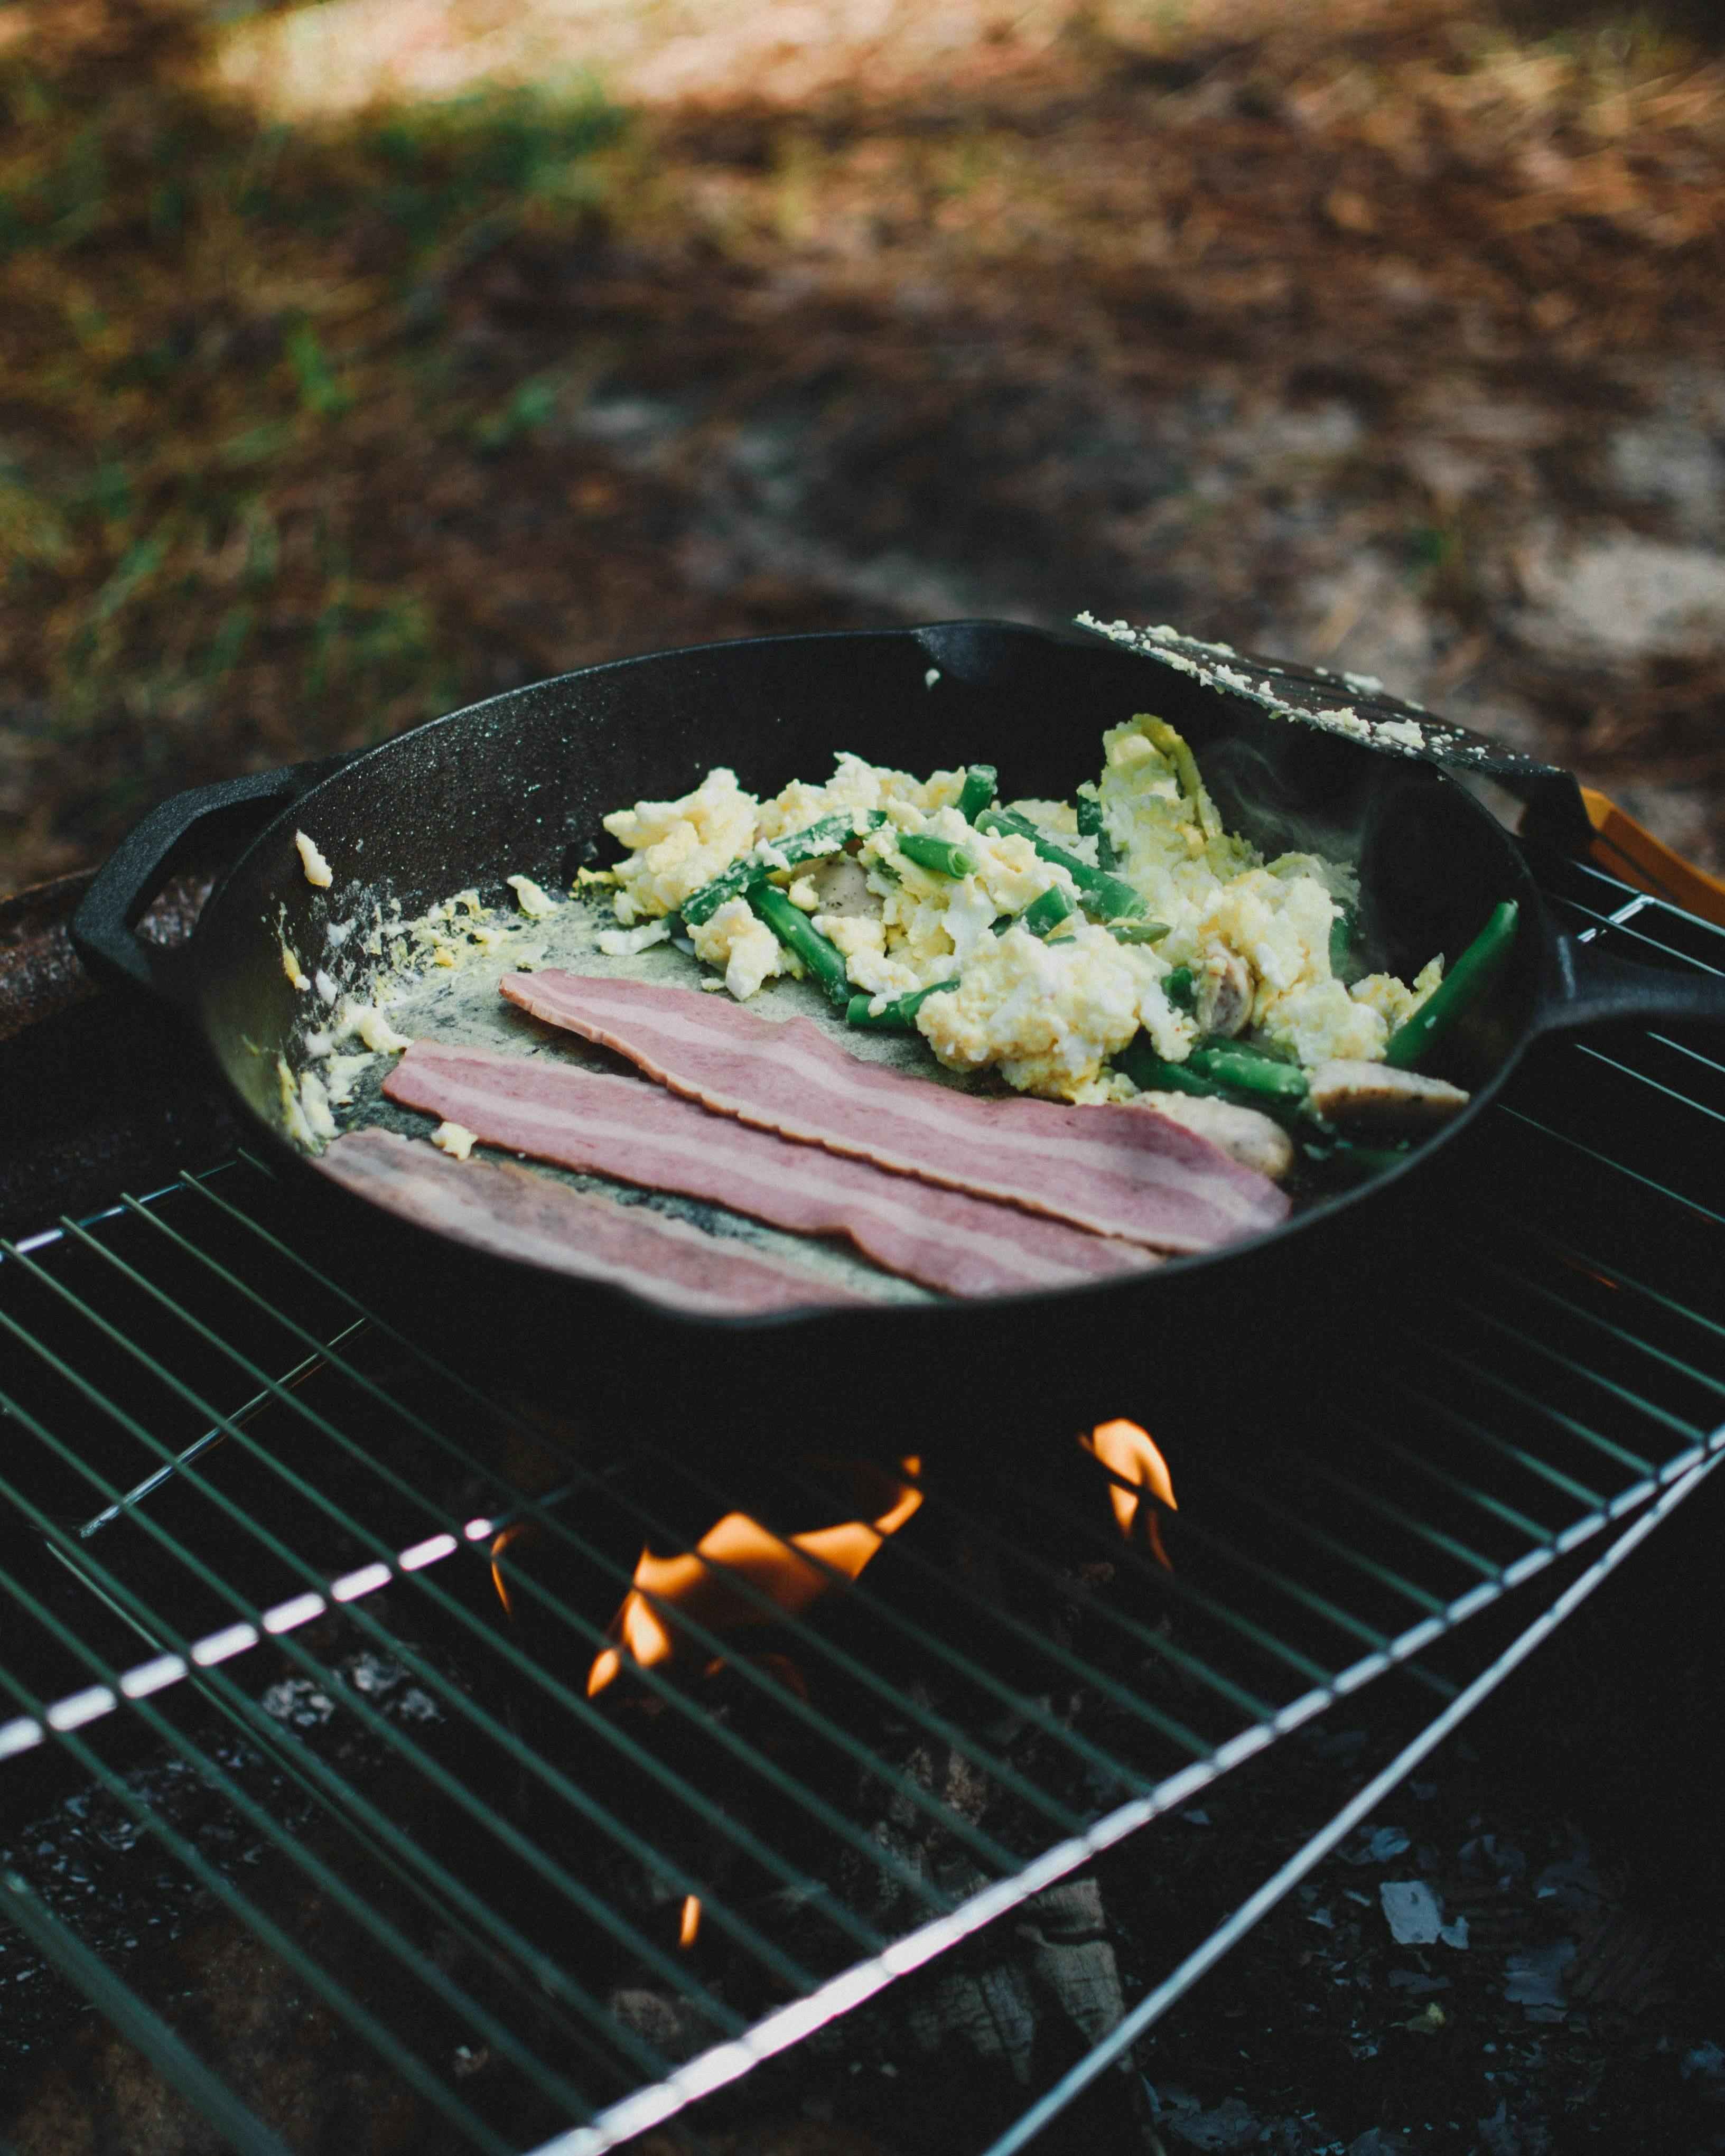 A cast-iron skillet sits on a grate above a campfire. In the skillet is a scramble with a few slices of bacon.